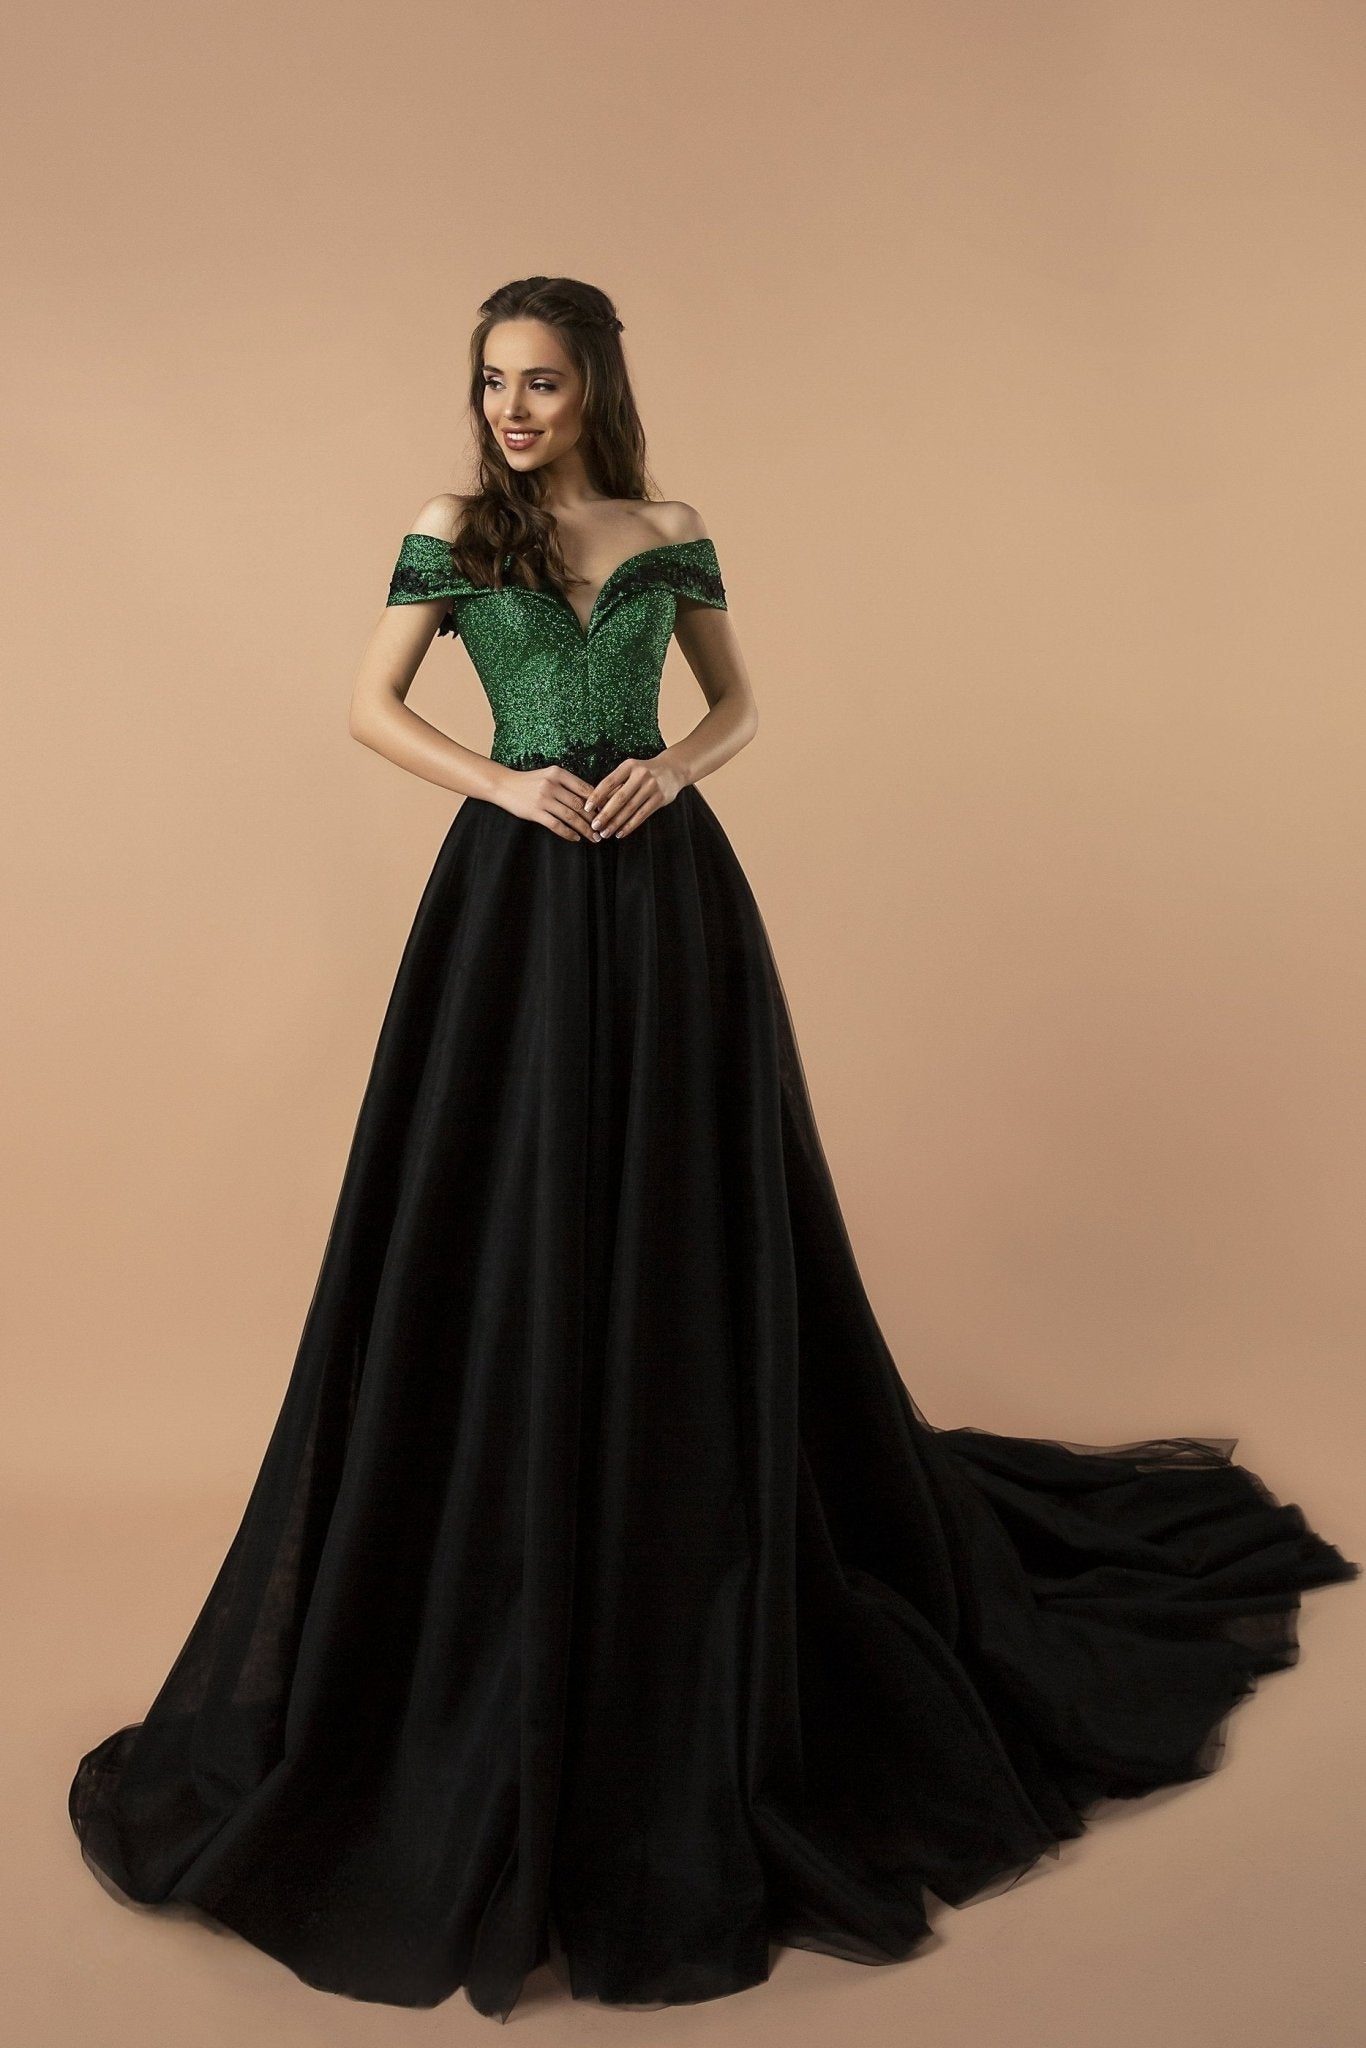 Enchanting Emerald Off Shoulder Gothic wedding Dresses with Sequined Corset - Dramatic Black Tulle Evening Gown Plus Size - WonderlandByLilian